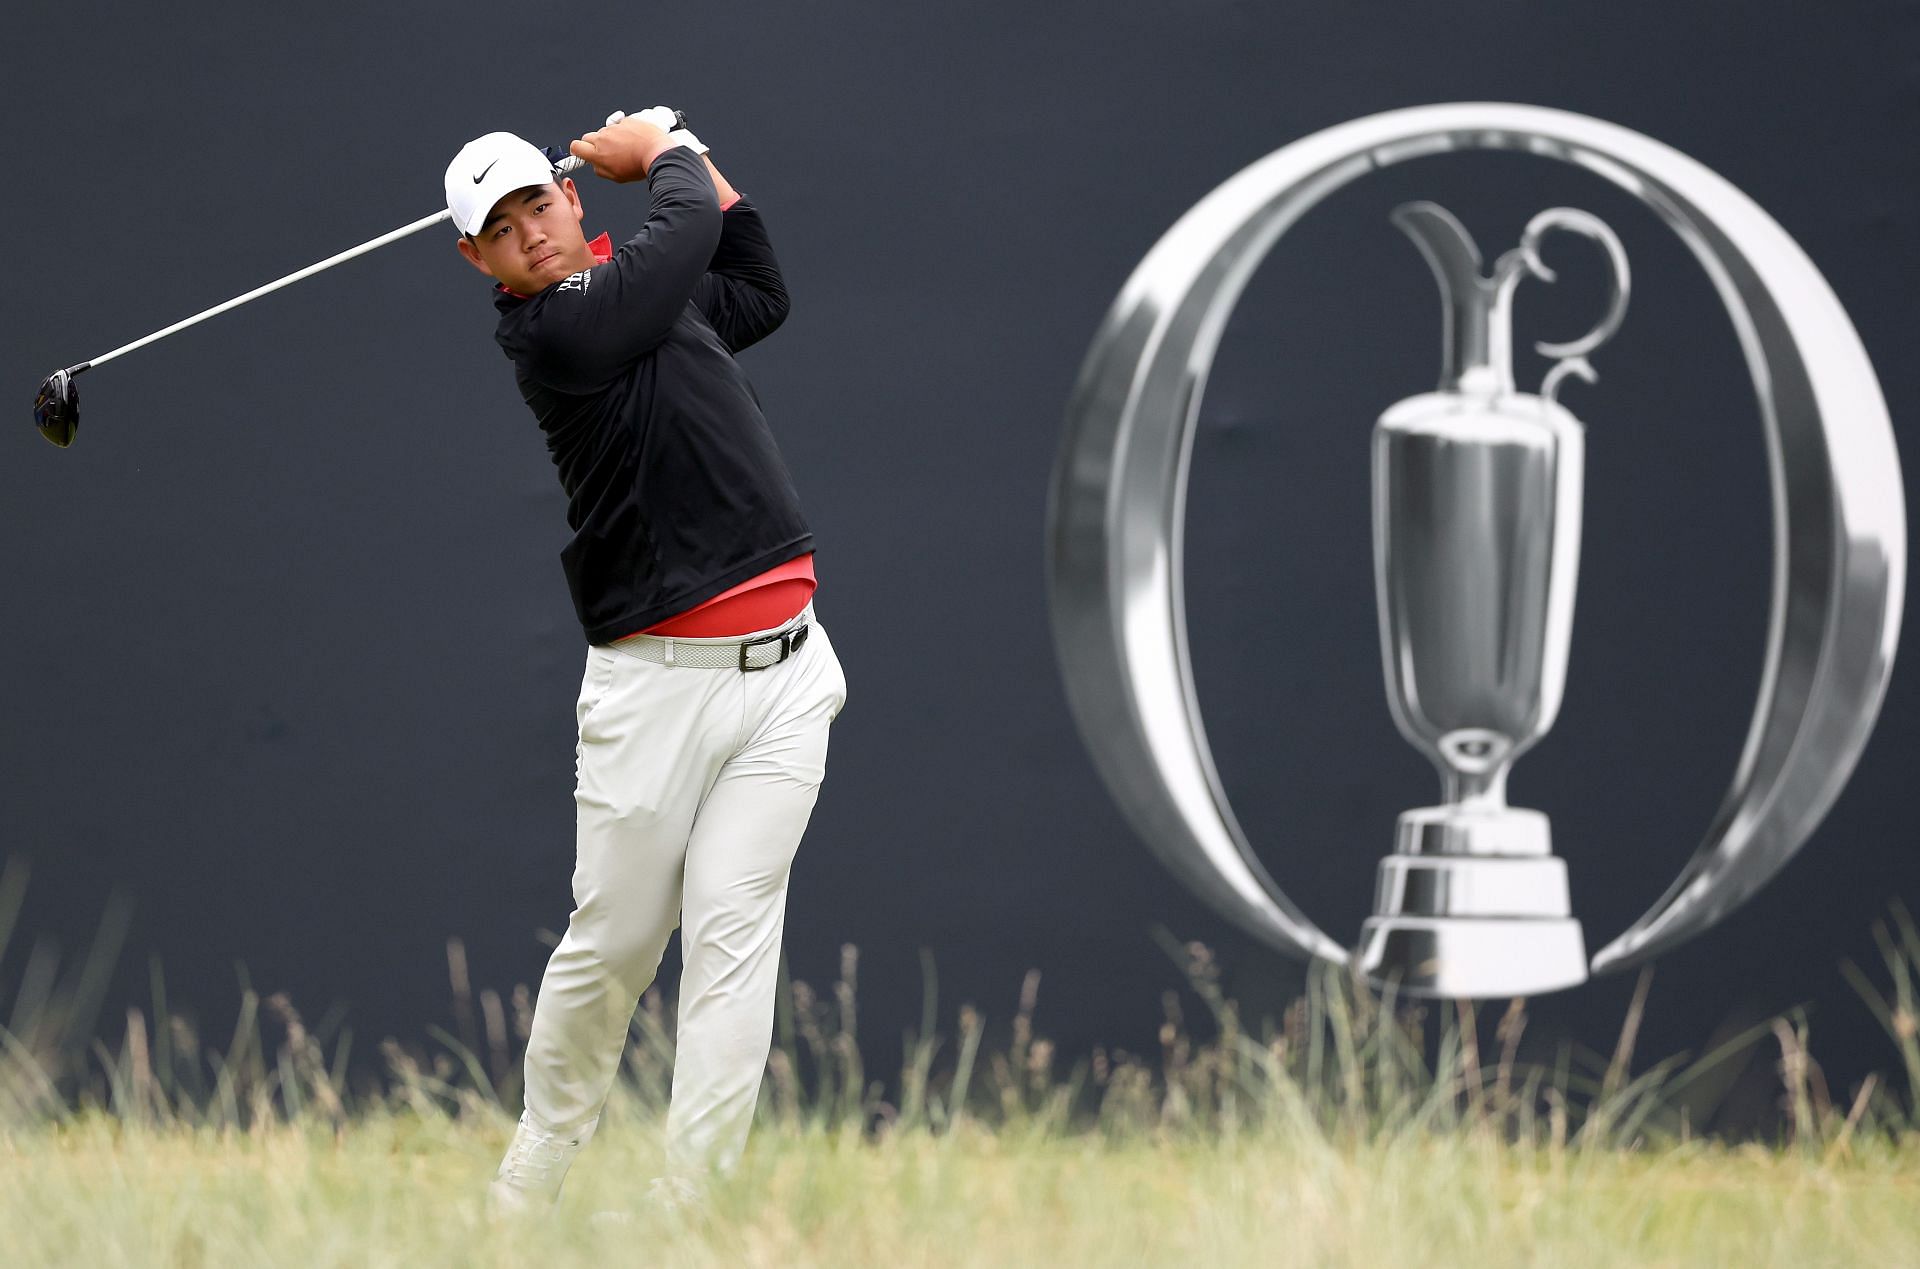 Tom Kim at the 2023 Open Championship (via Getty Images)